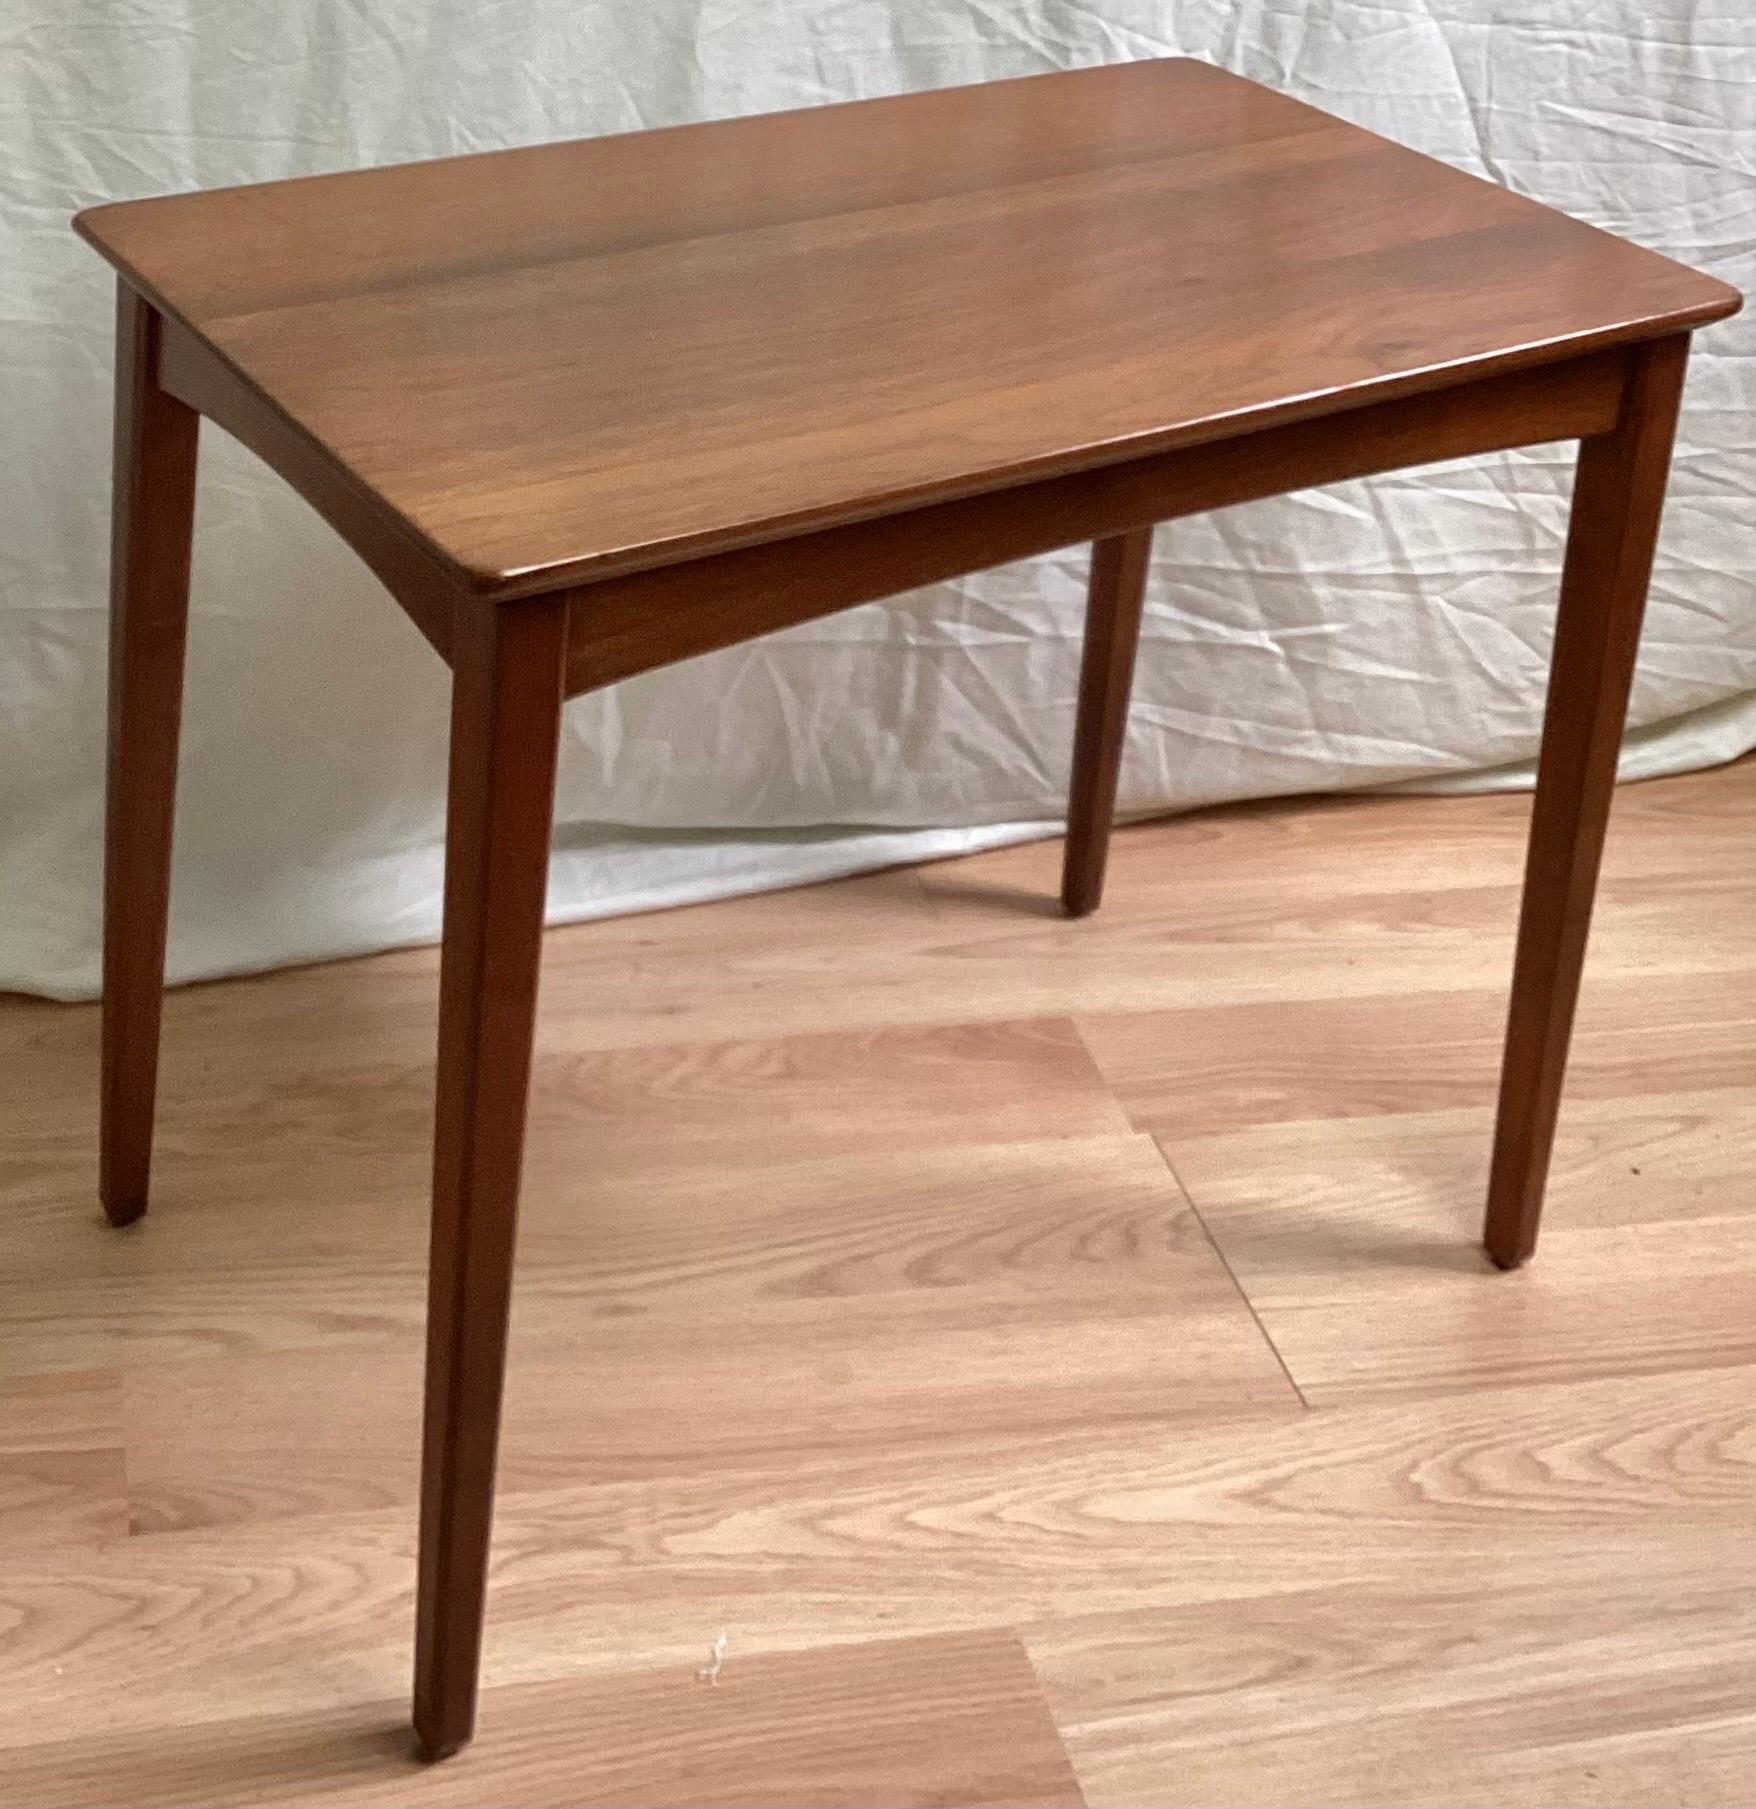 Mid-Century Danish Modern Teak Side Table marked only D74. Very clean and a great size. 20